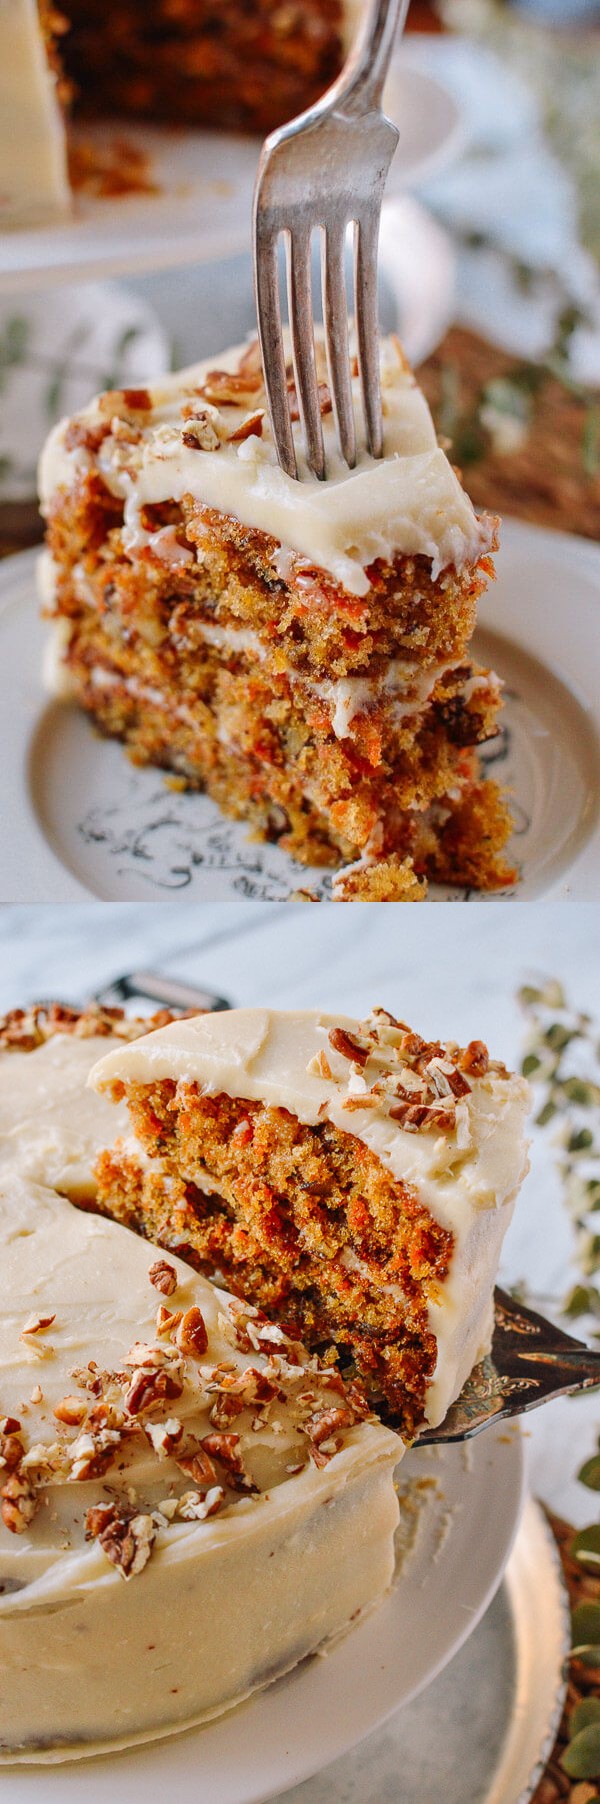 Our Favorite Carrot Cake